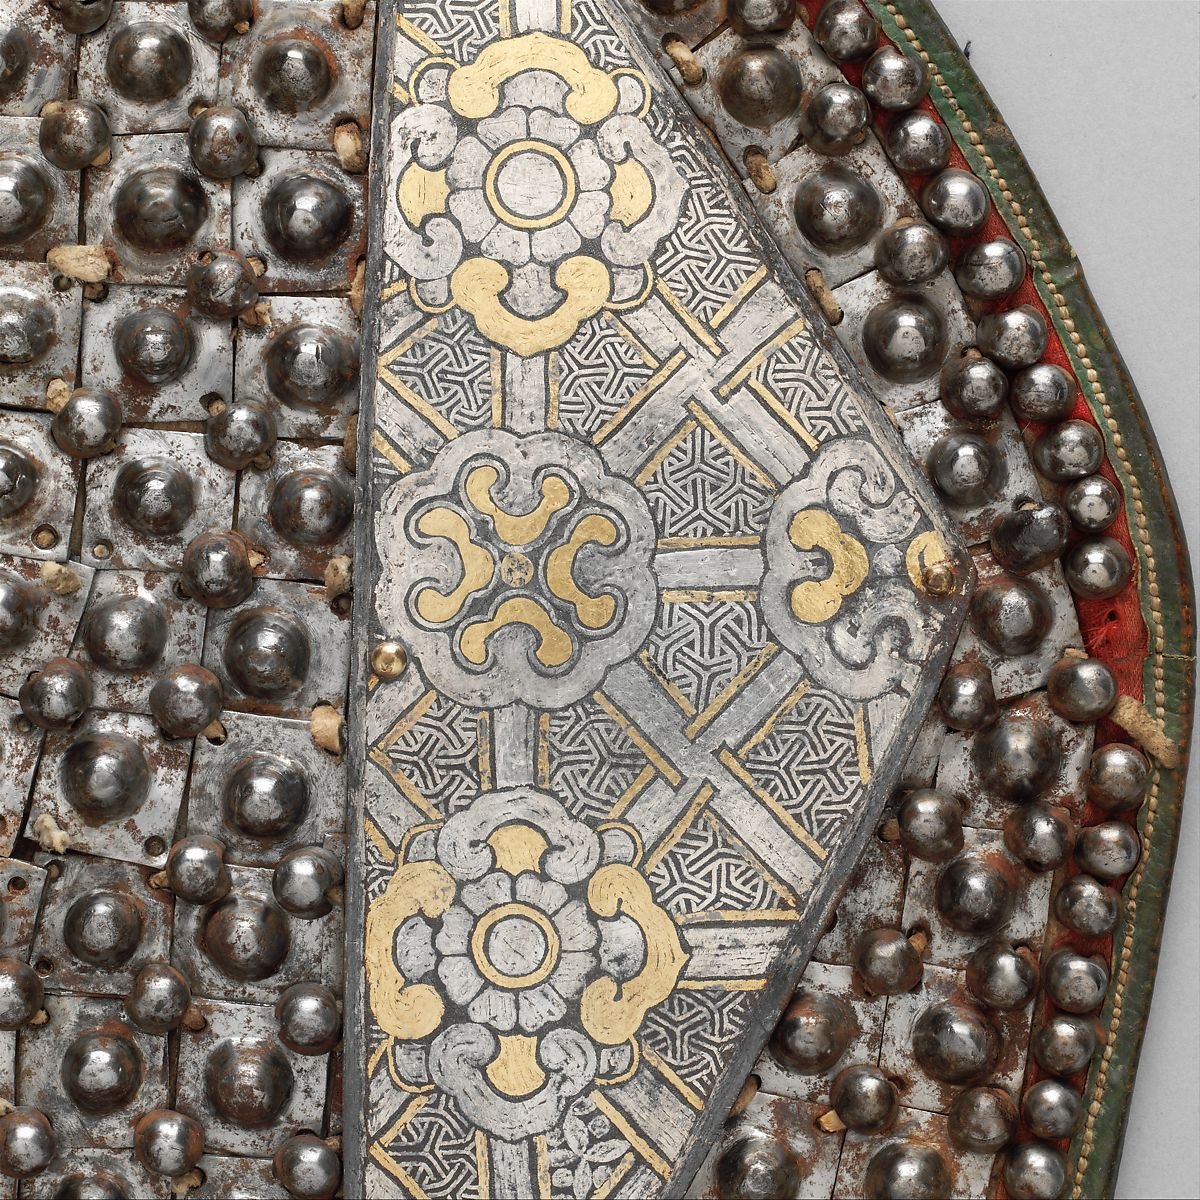 hOLD UP, I HAVE NOW ENCOUNTERED THIS PATTERN FOR THE *FIRST TIME EVER* ON AN ACTUAL HISTORICAL PIECE OF ARMOR it's on c. 16th century horse armor from Tibet or Mongolia, and it's very extremely small. This explains NOTHING